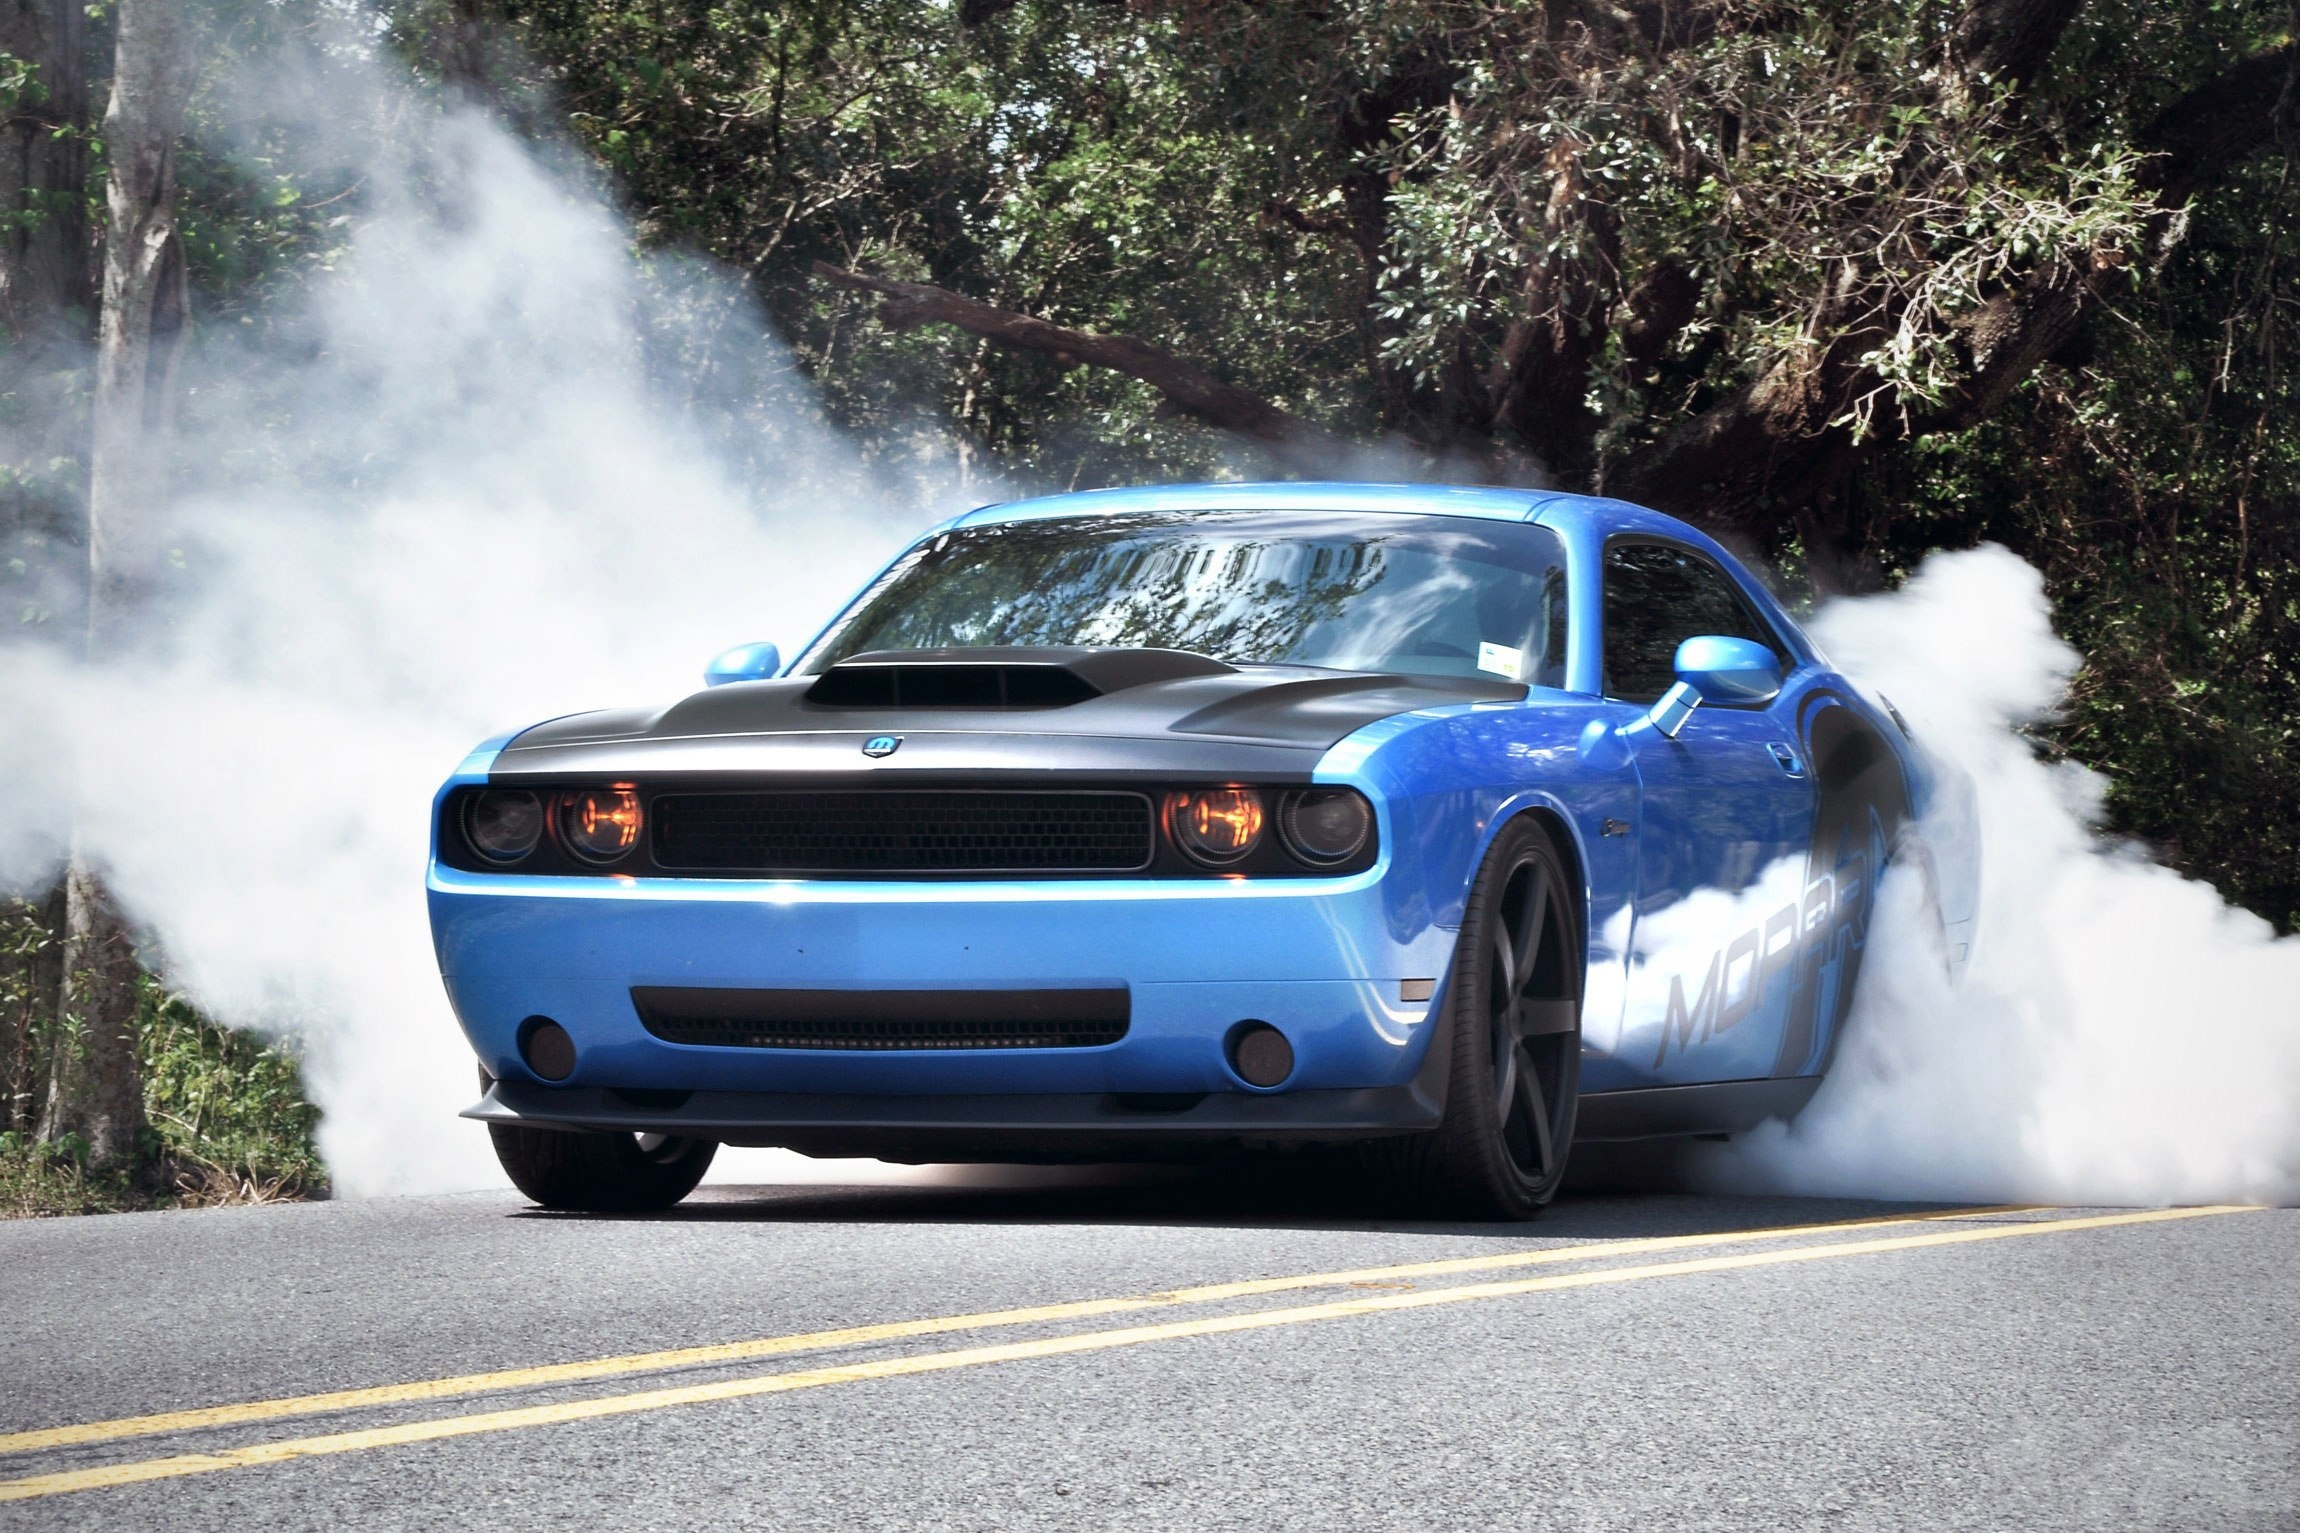 Dodge Challenger Burnout Smoke Muscle Cars Wallpaper Background